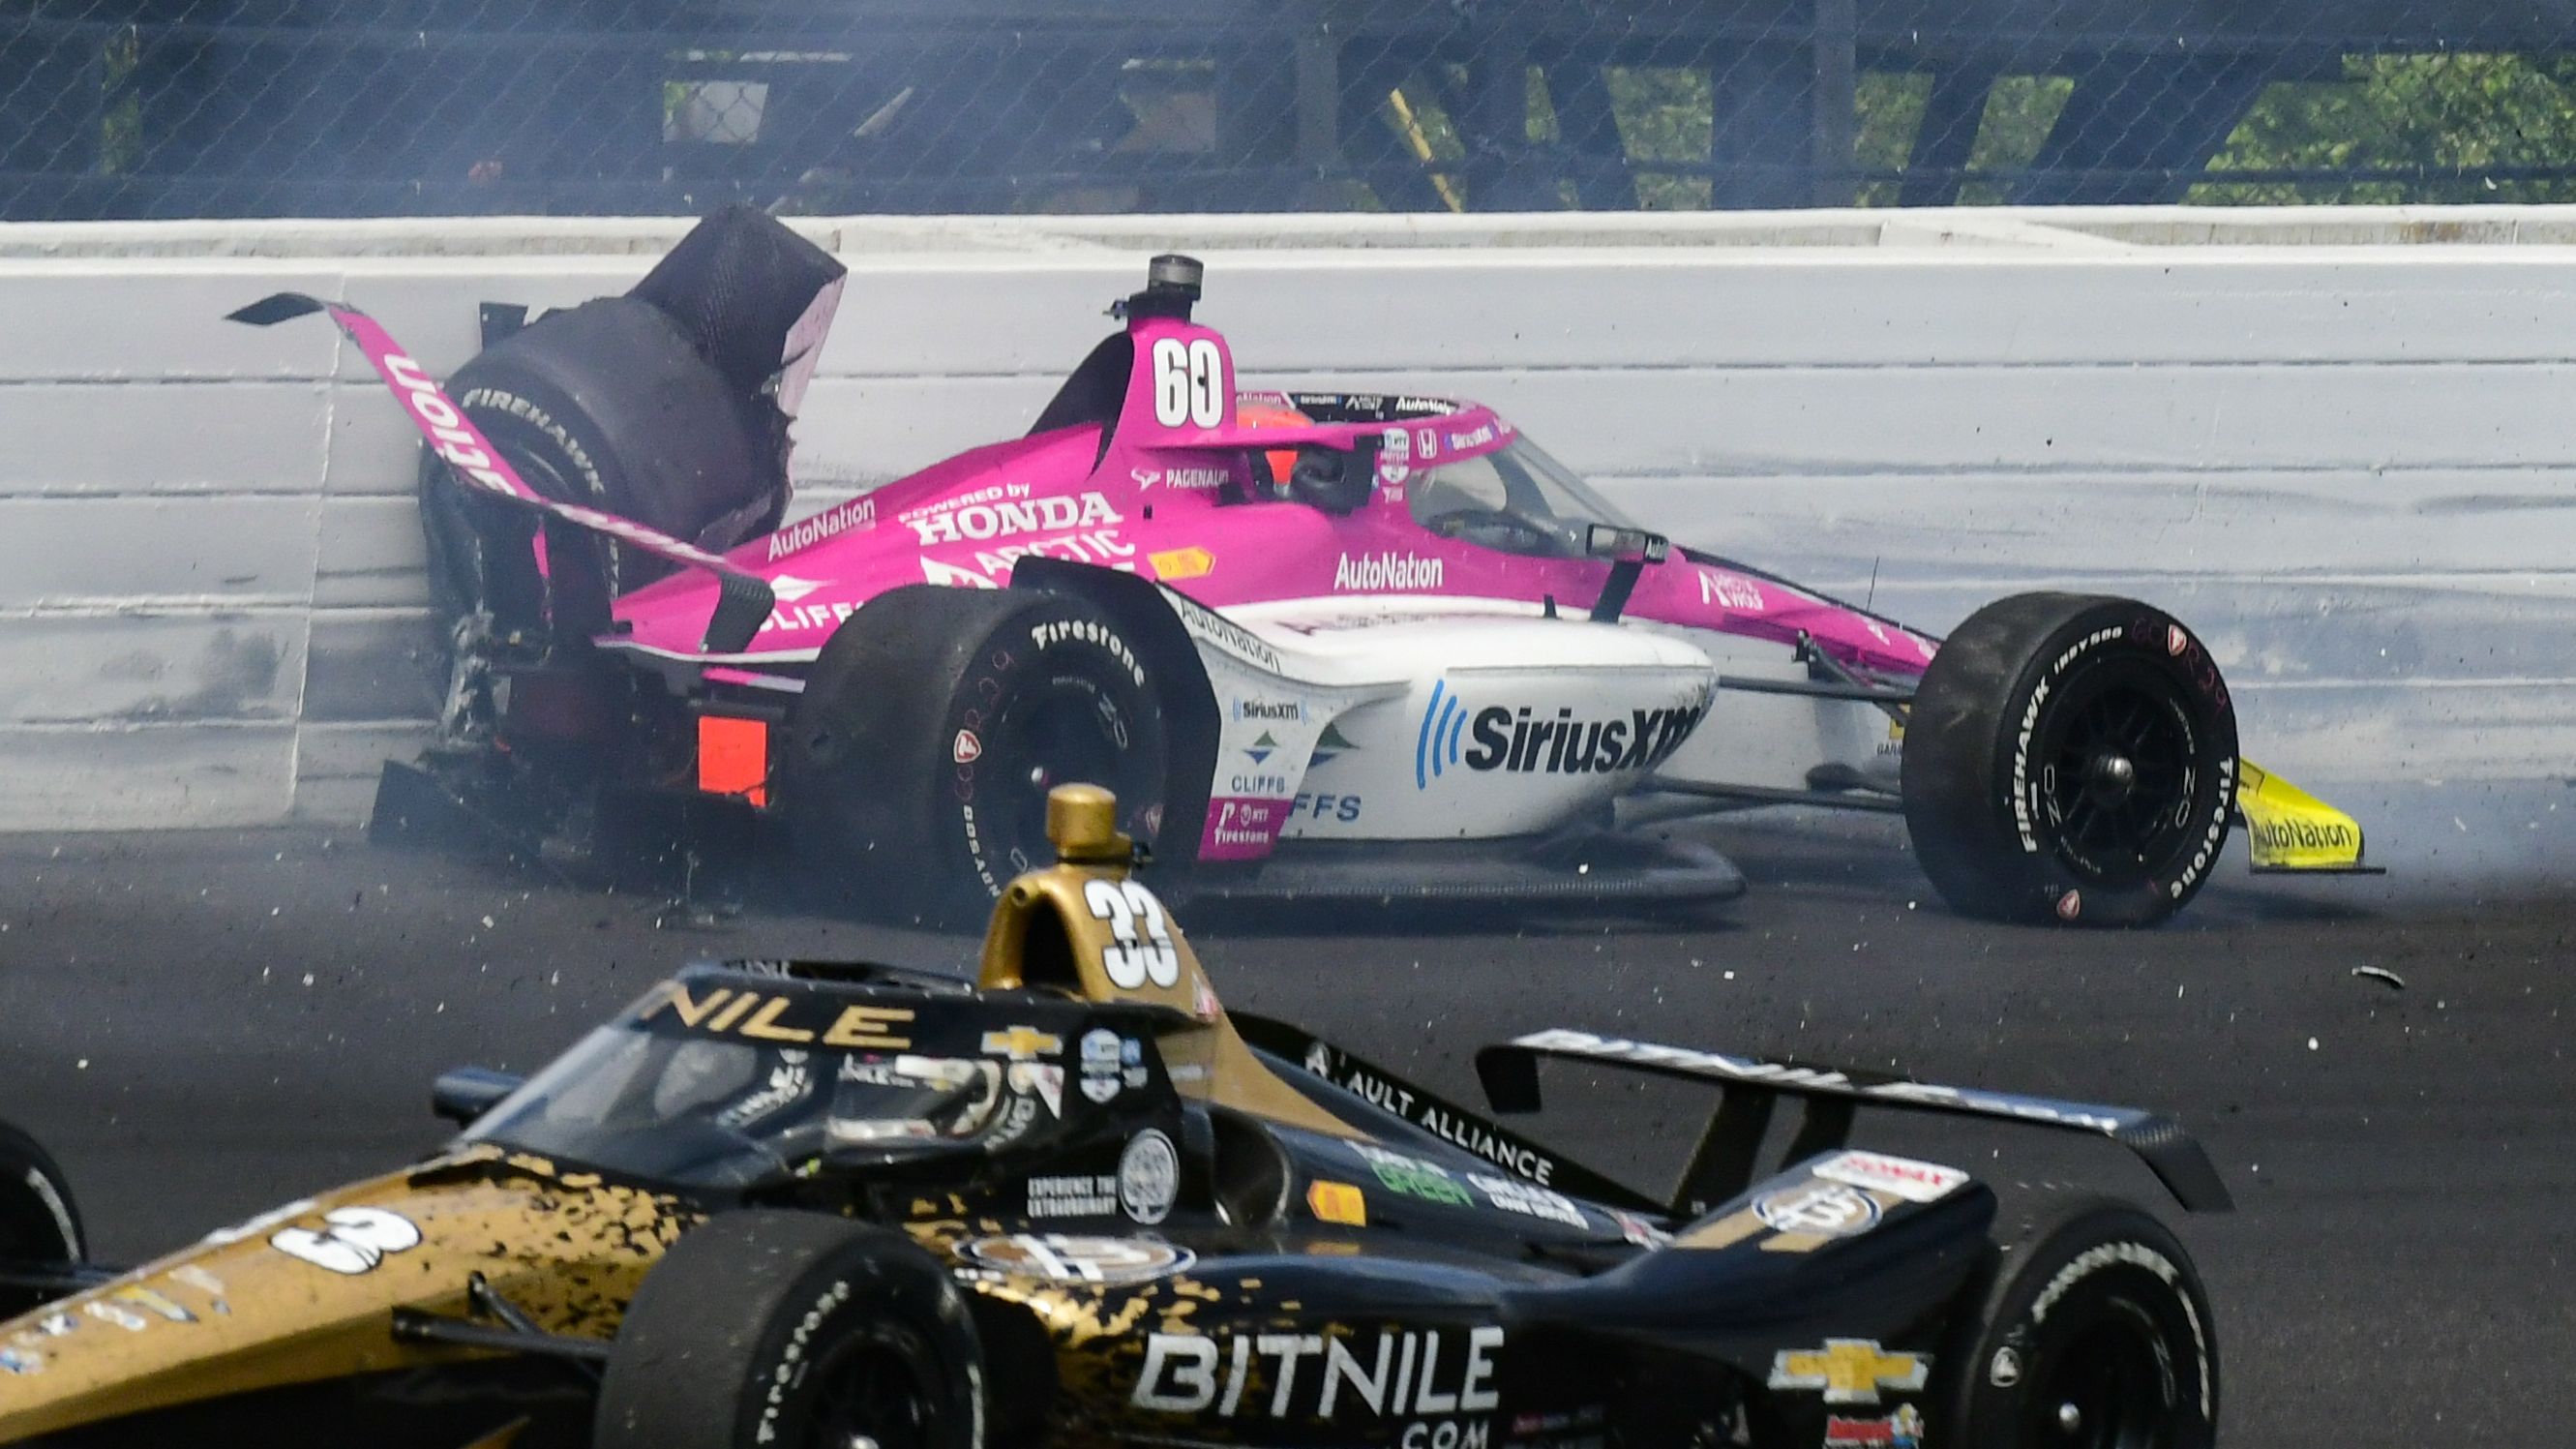 Simon Pagenaud hits the wall in the third turn during the Indianapolis 500 after contact with Scott McLaughlin.